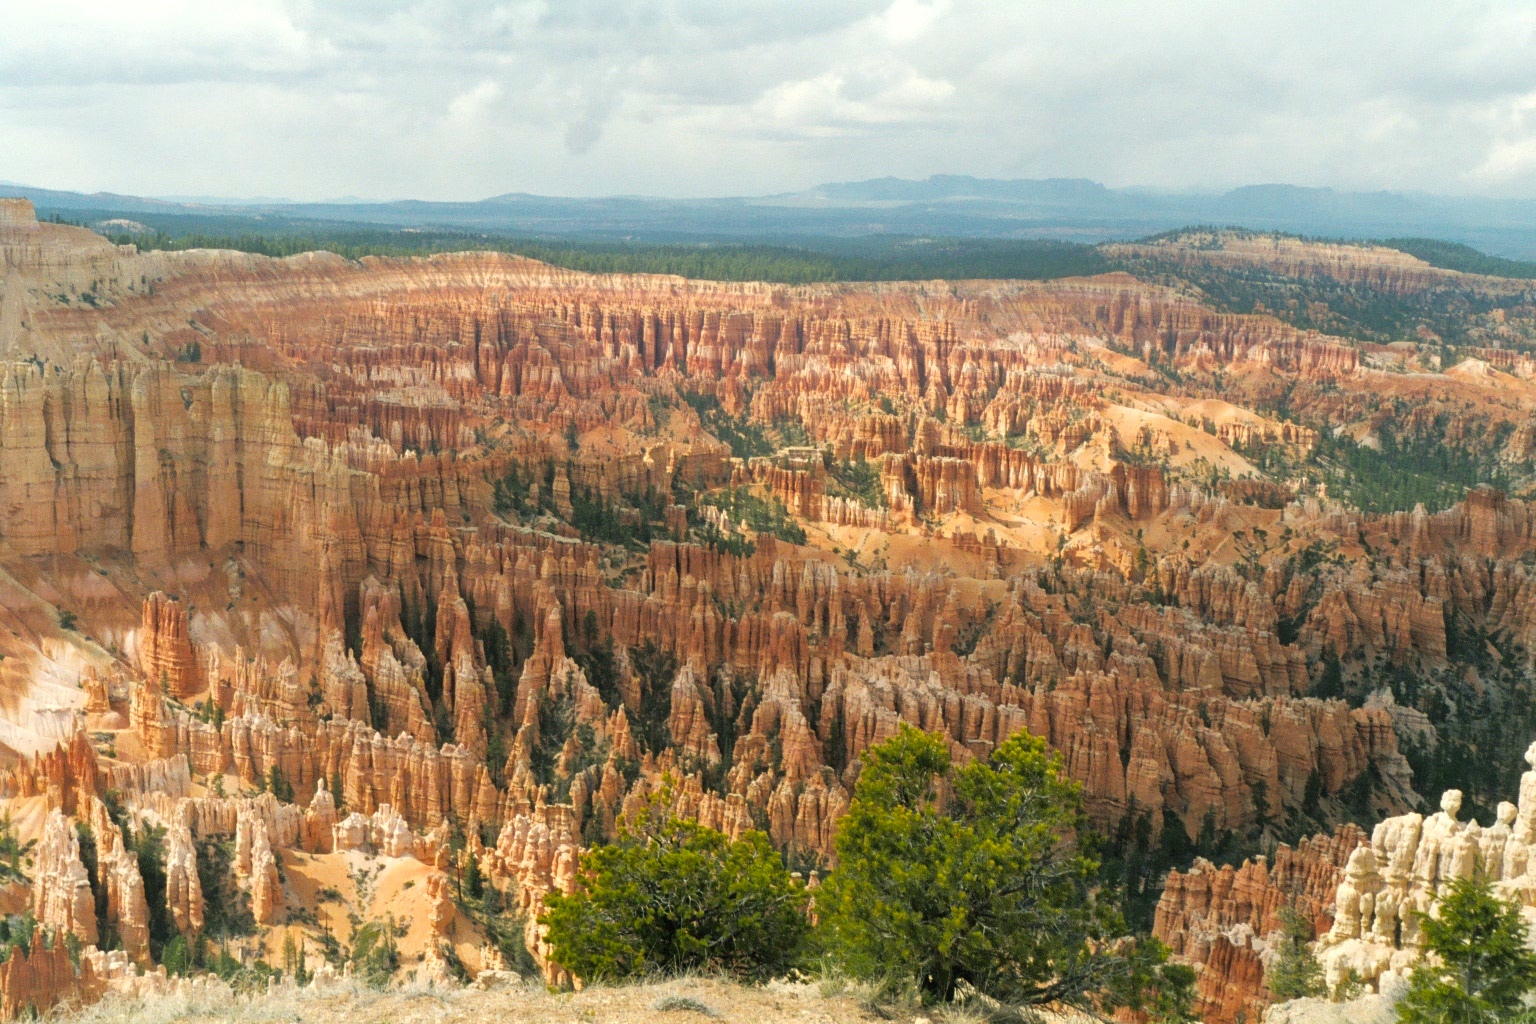 Bryce Amphitheater, with its huge array of hoodoos (columns of rock).